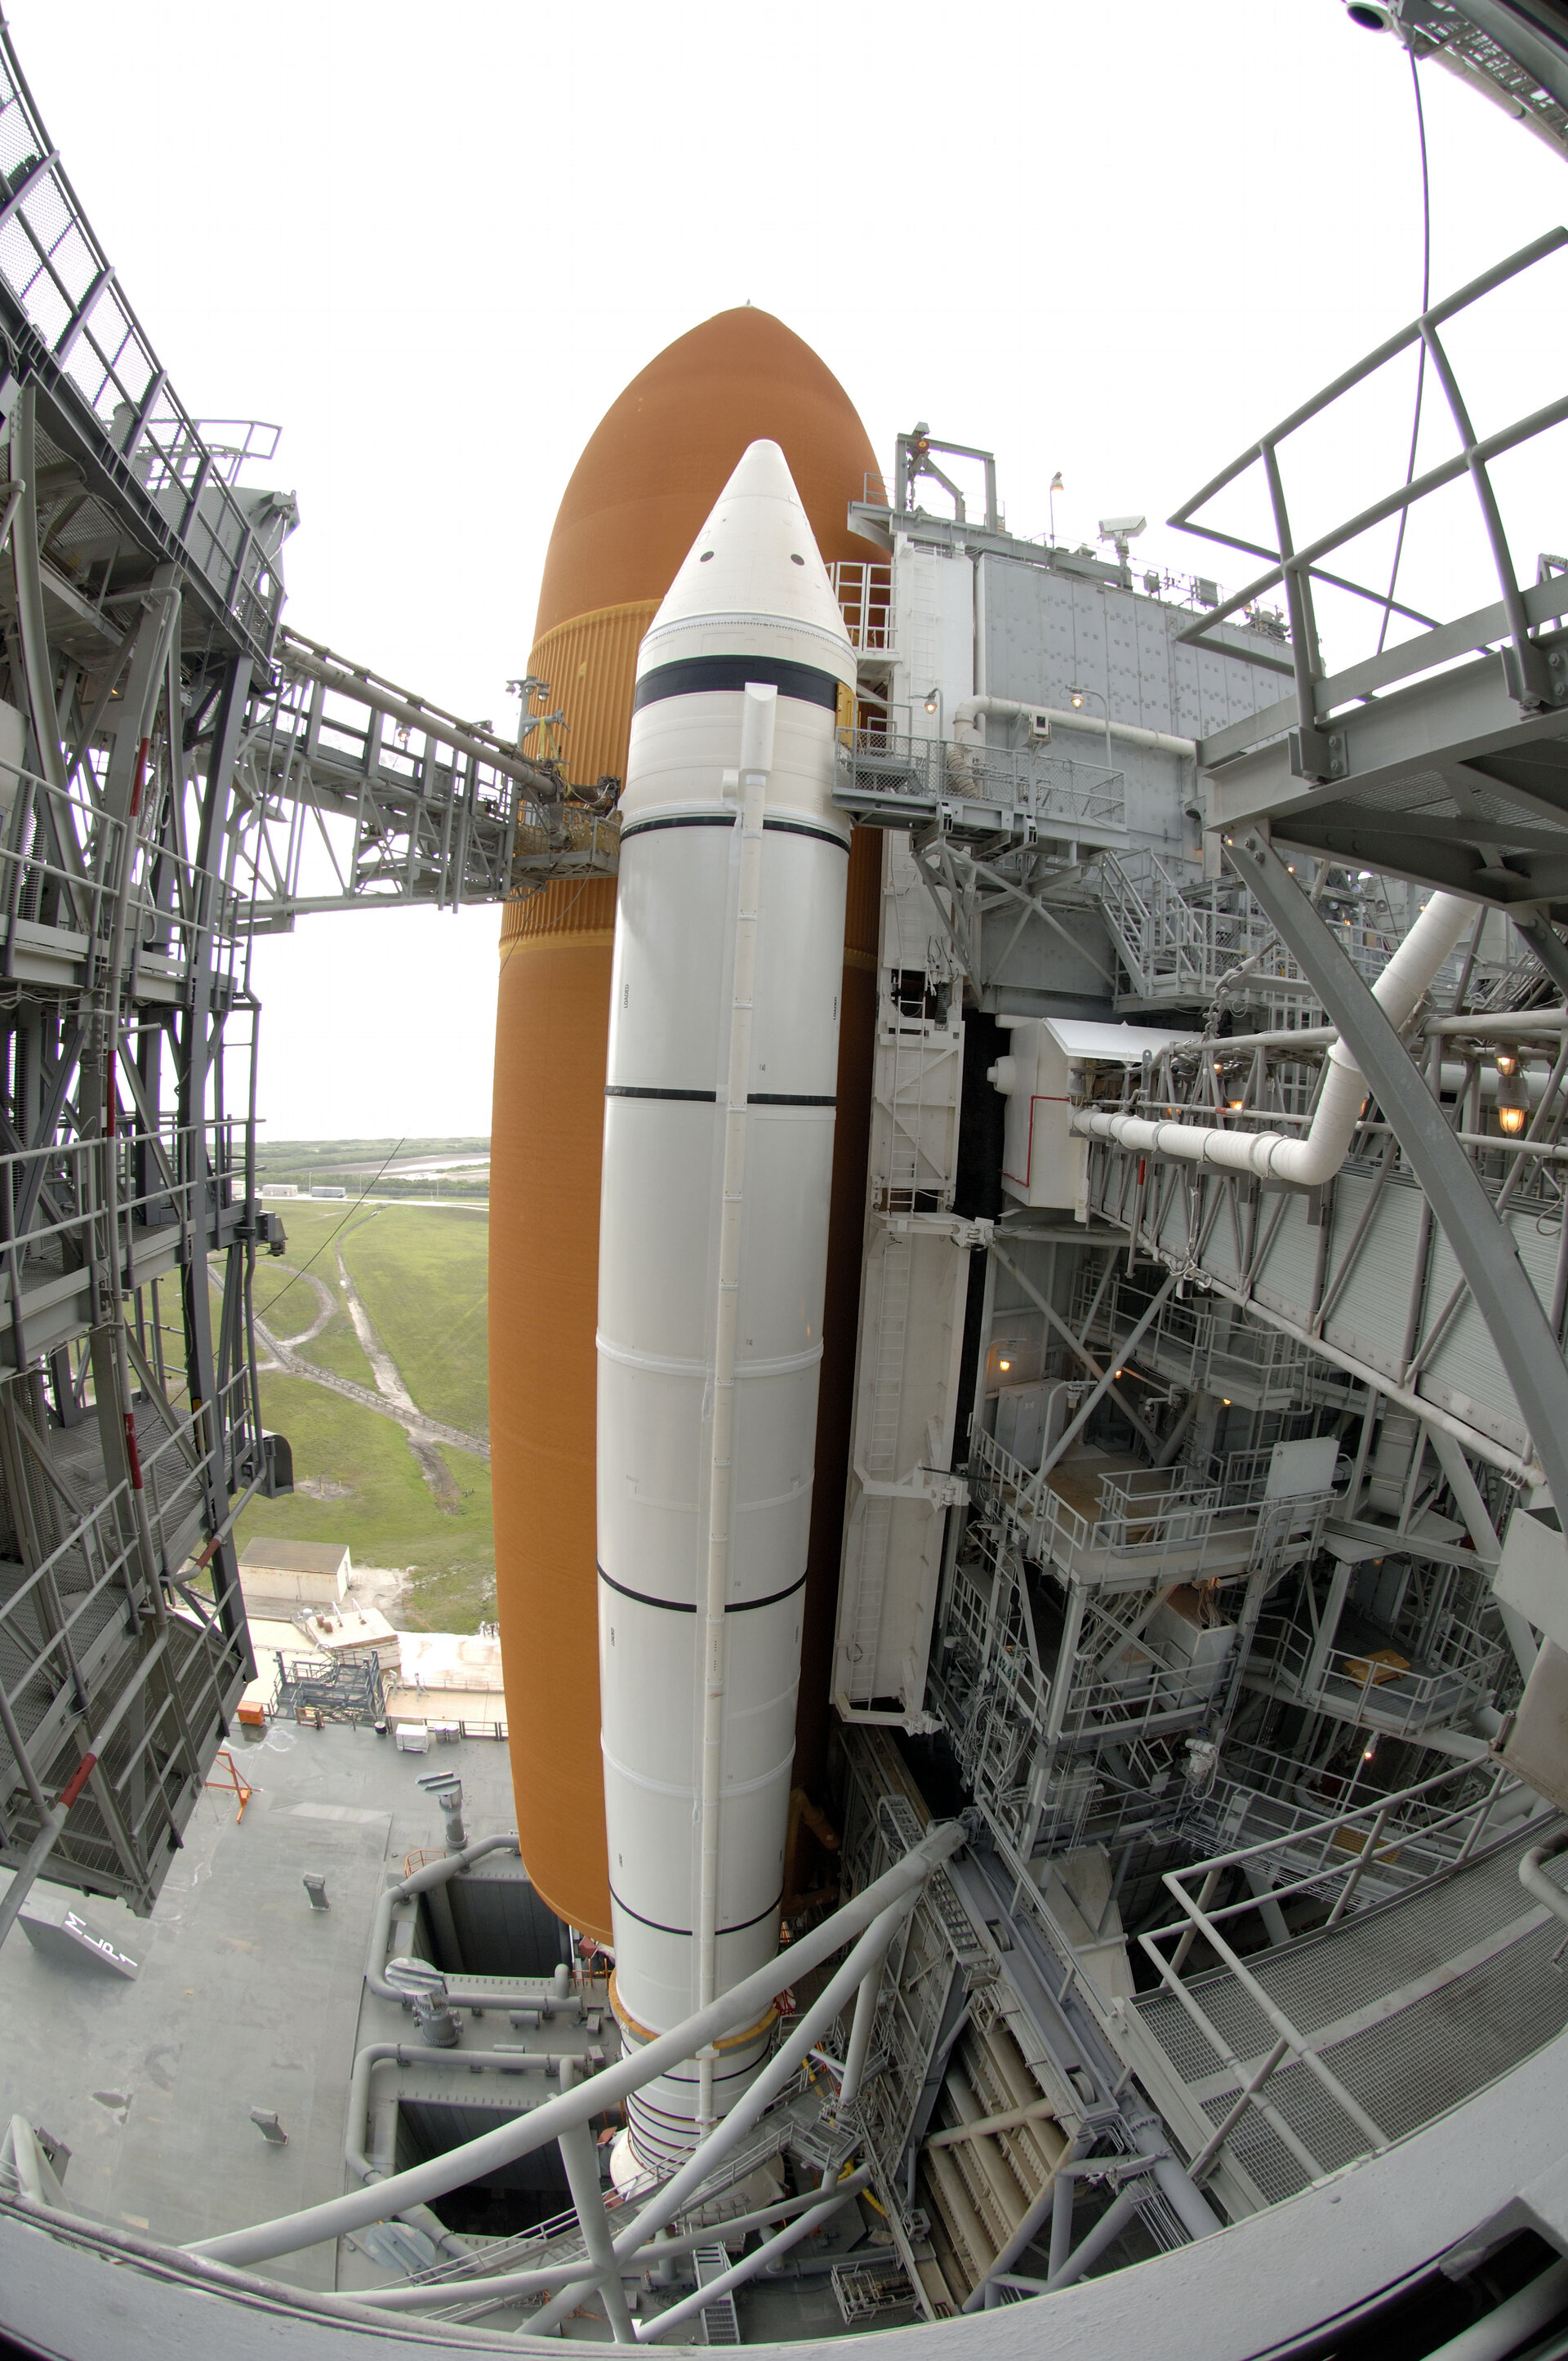 Space Shuttle Discovery stands ready on Launch Pad 39B at NASA's Kennedy Space Center, in Florida